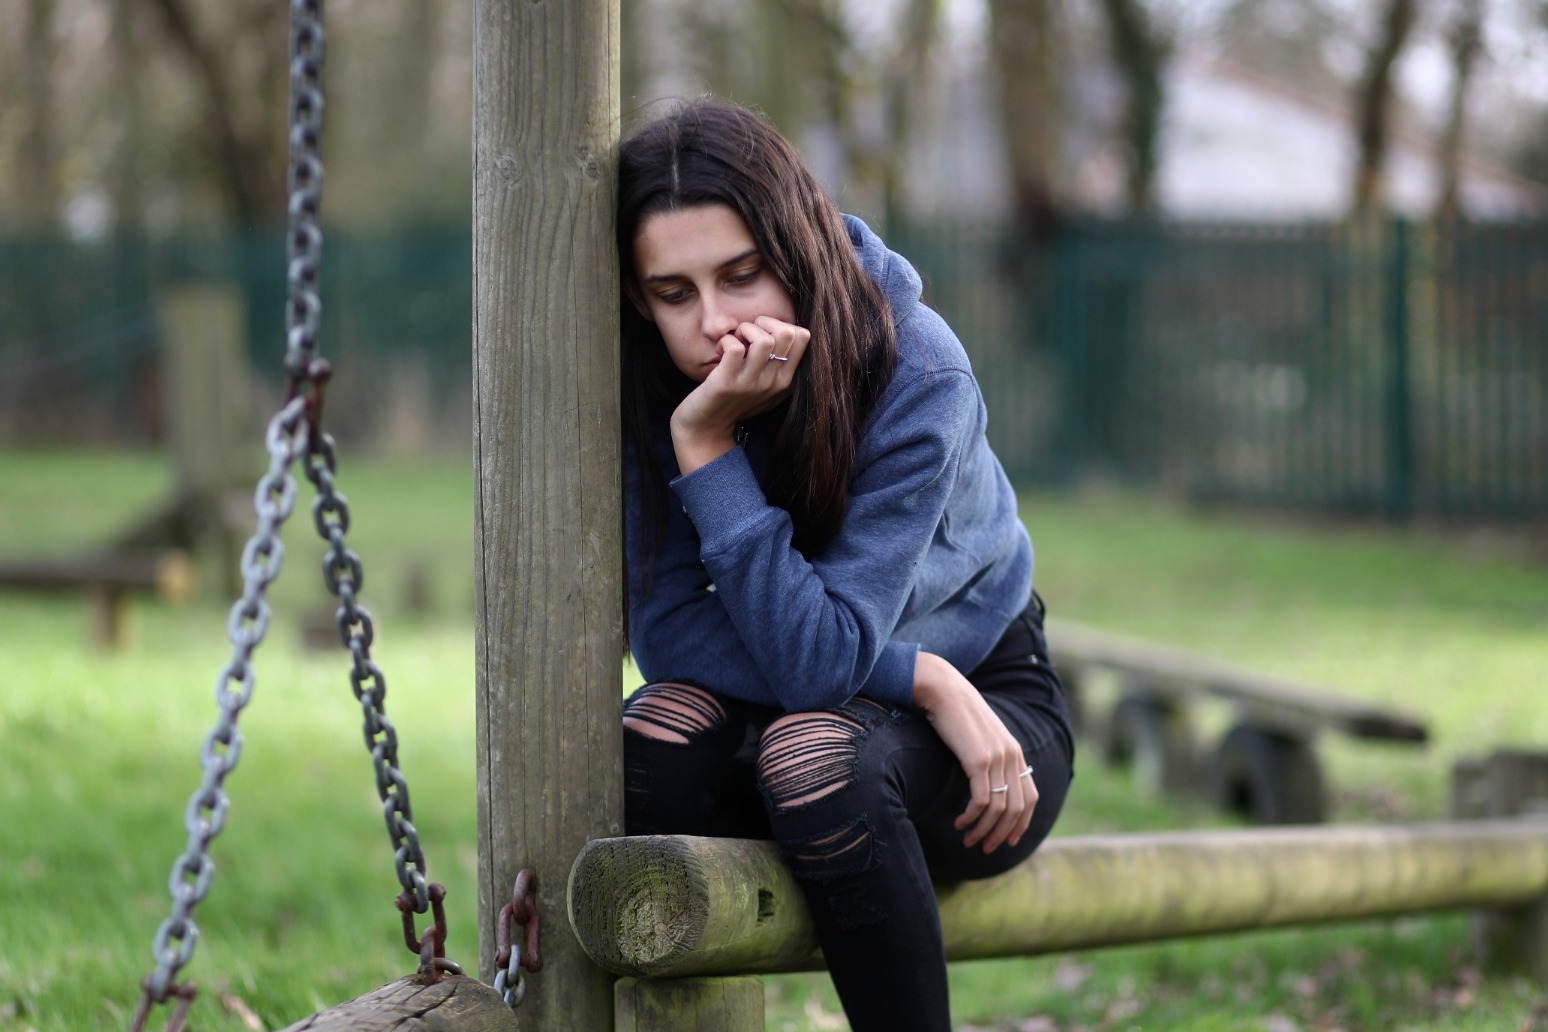 Thousands of young people ‘attempt suicide while waiting for NHS treatment’ 